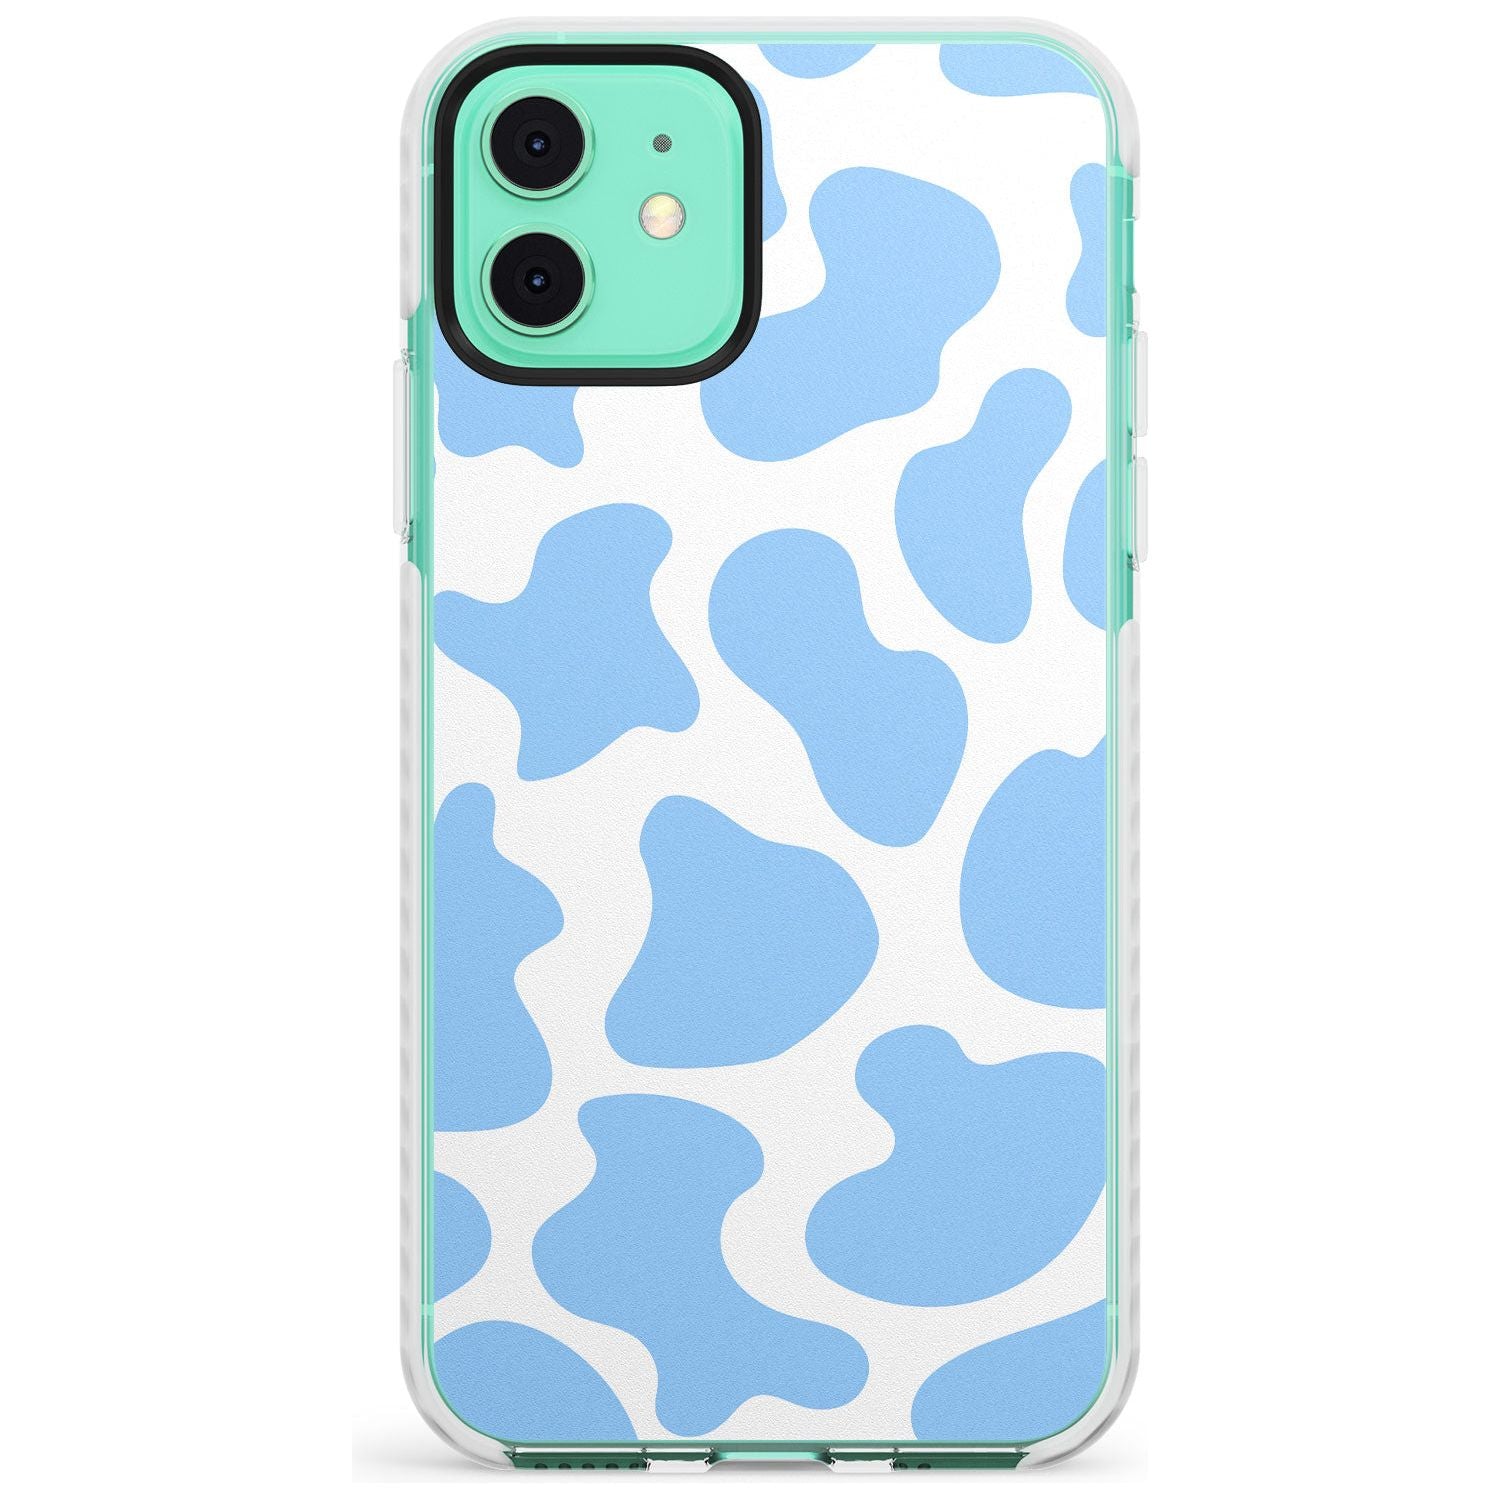 Blue and White Cow Print Impact Phone Case for iPhone 11